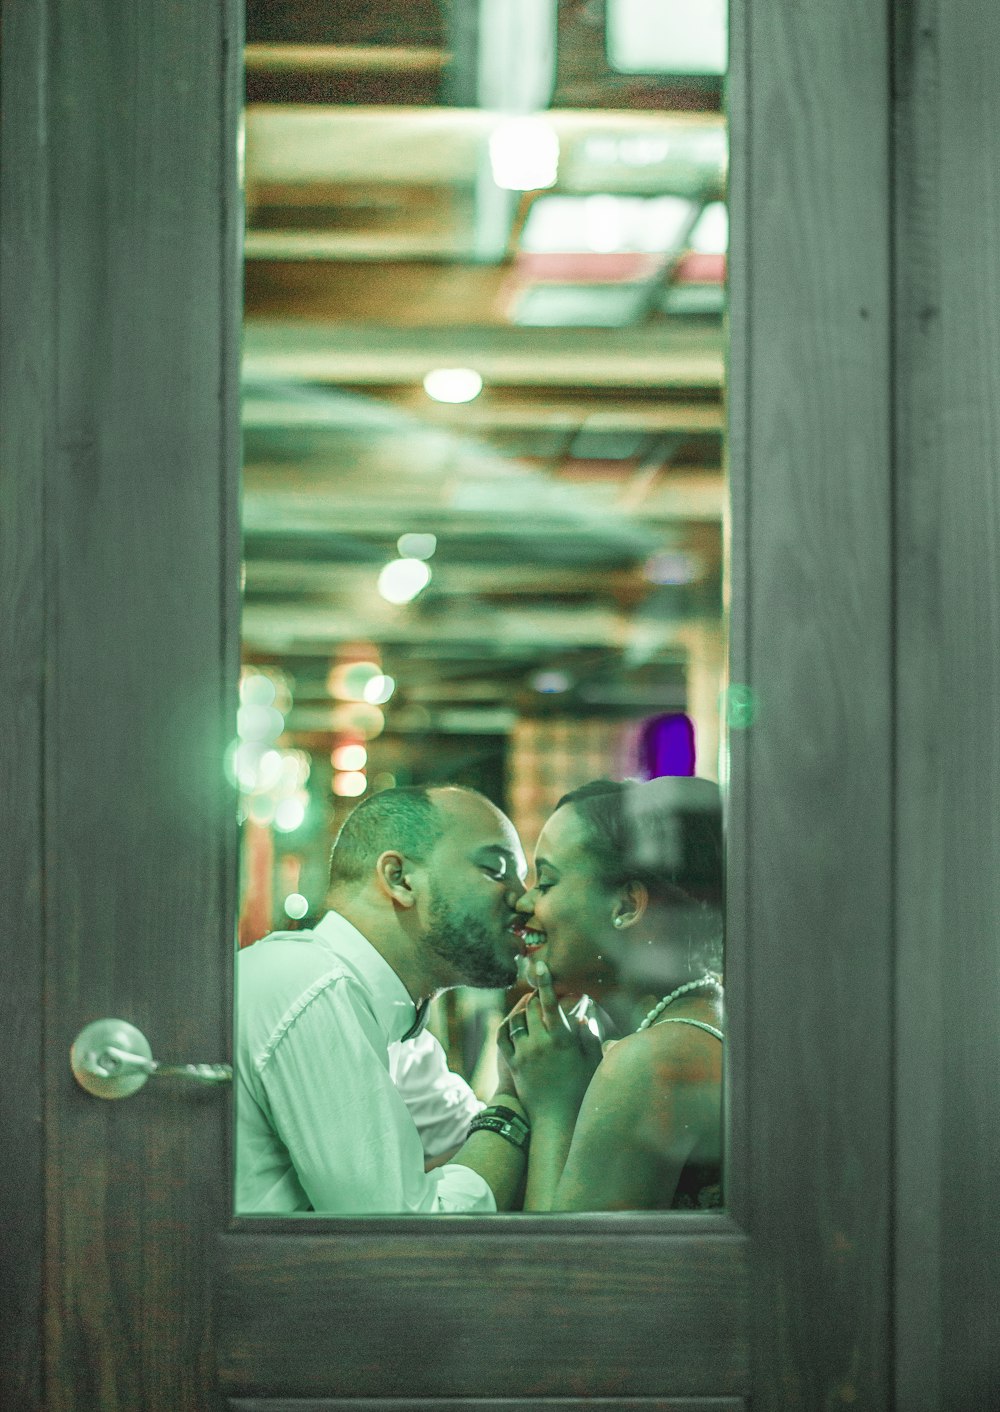 man in white suit kissing woman in white dress